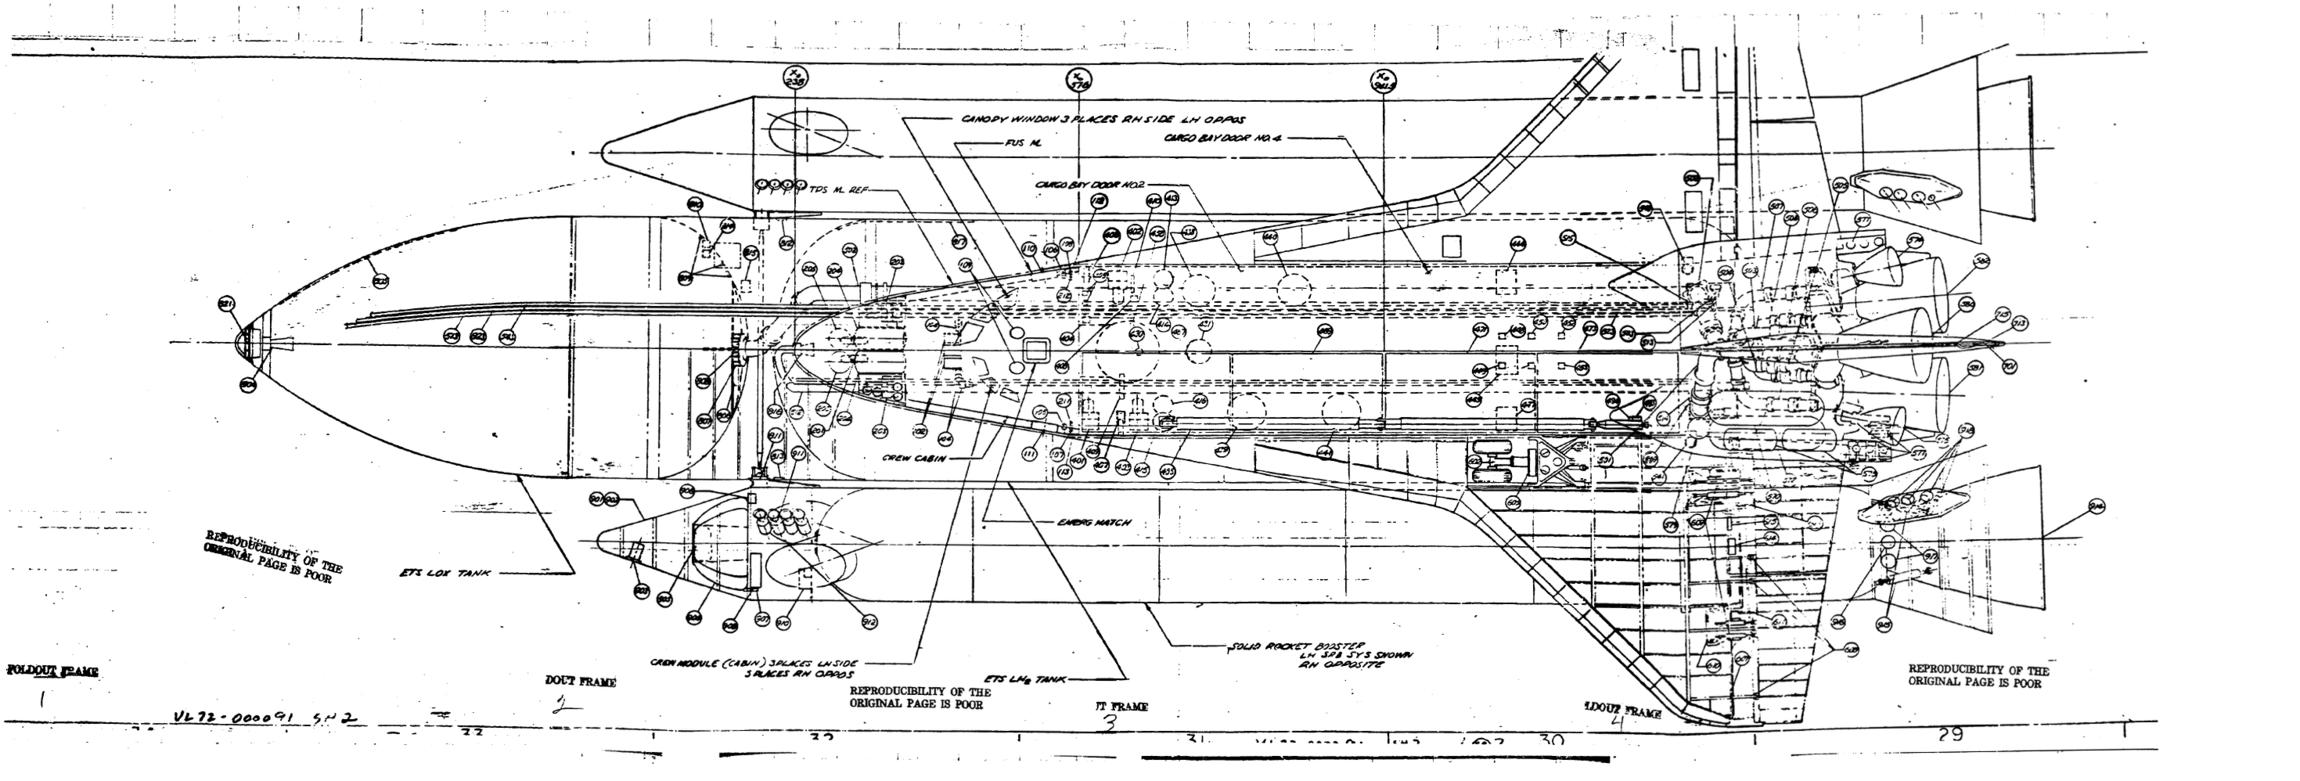 nasa space shuttle discovery blueprints